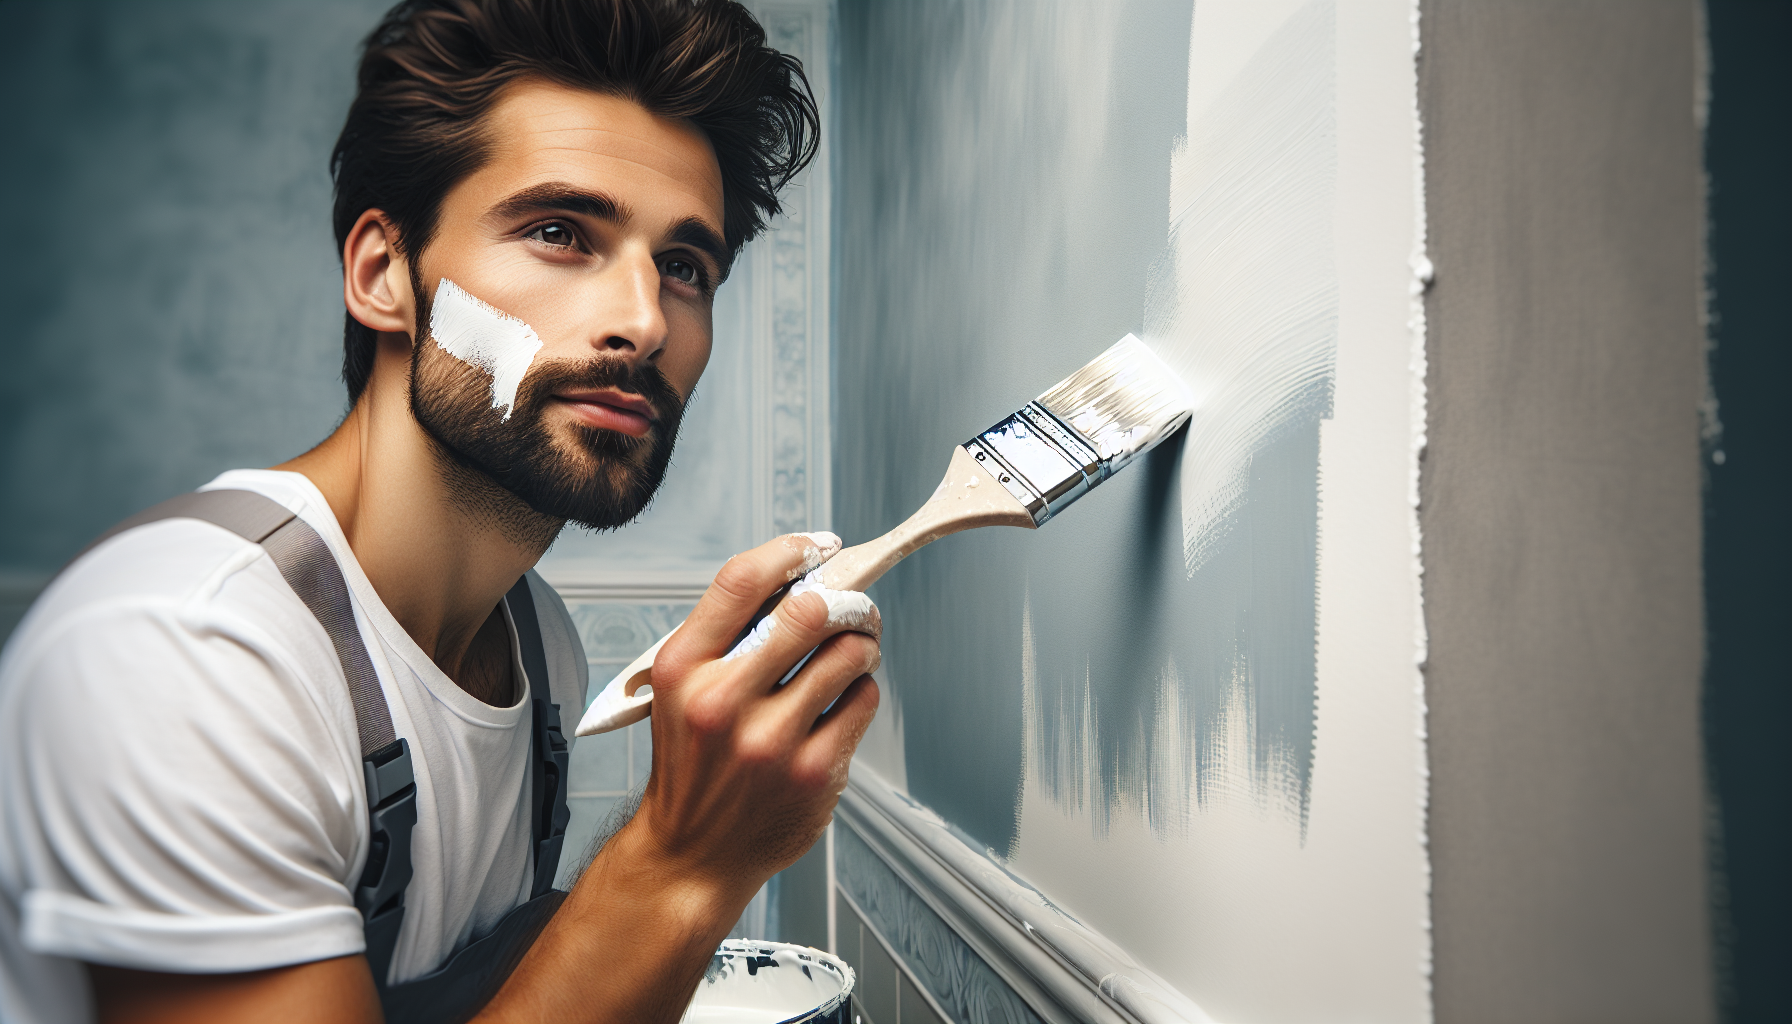 Top Picks for Best Bathroom Paint: Durable & Mold-Resistant Options